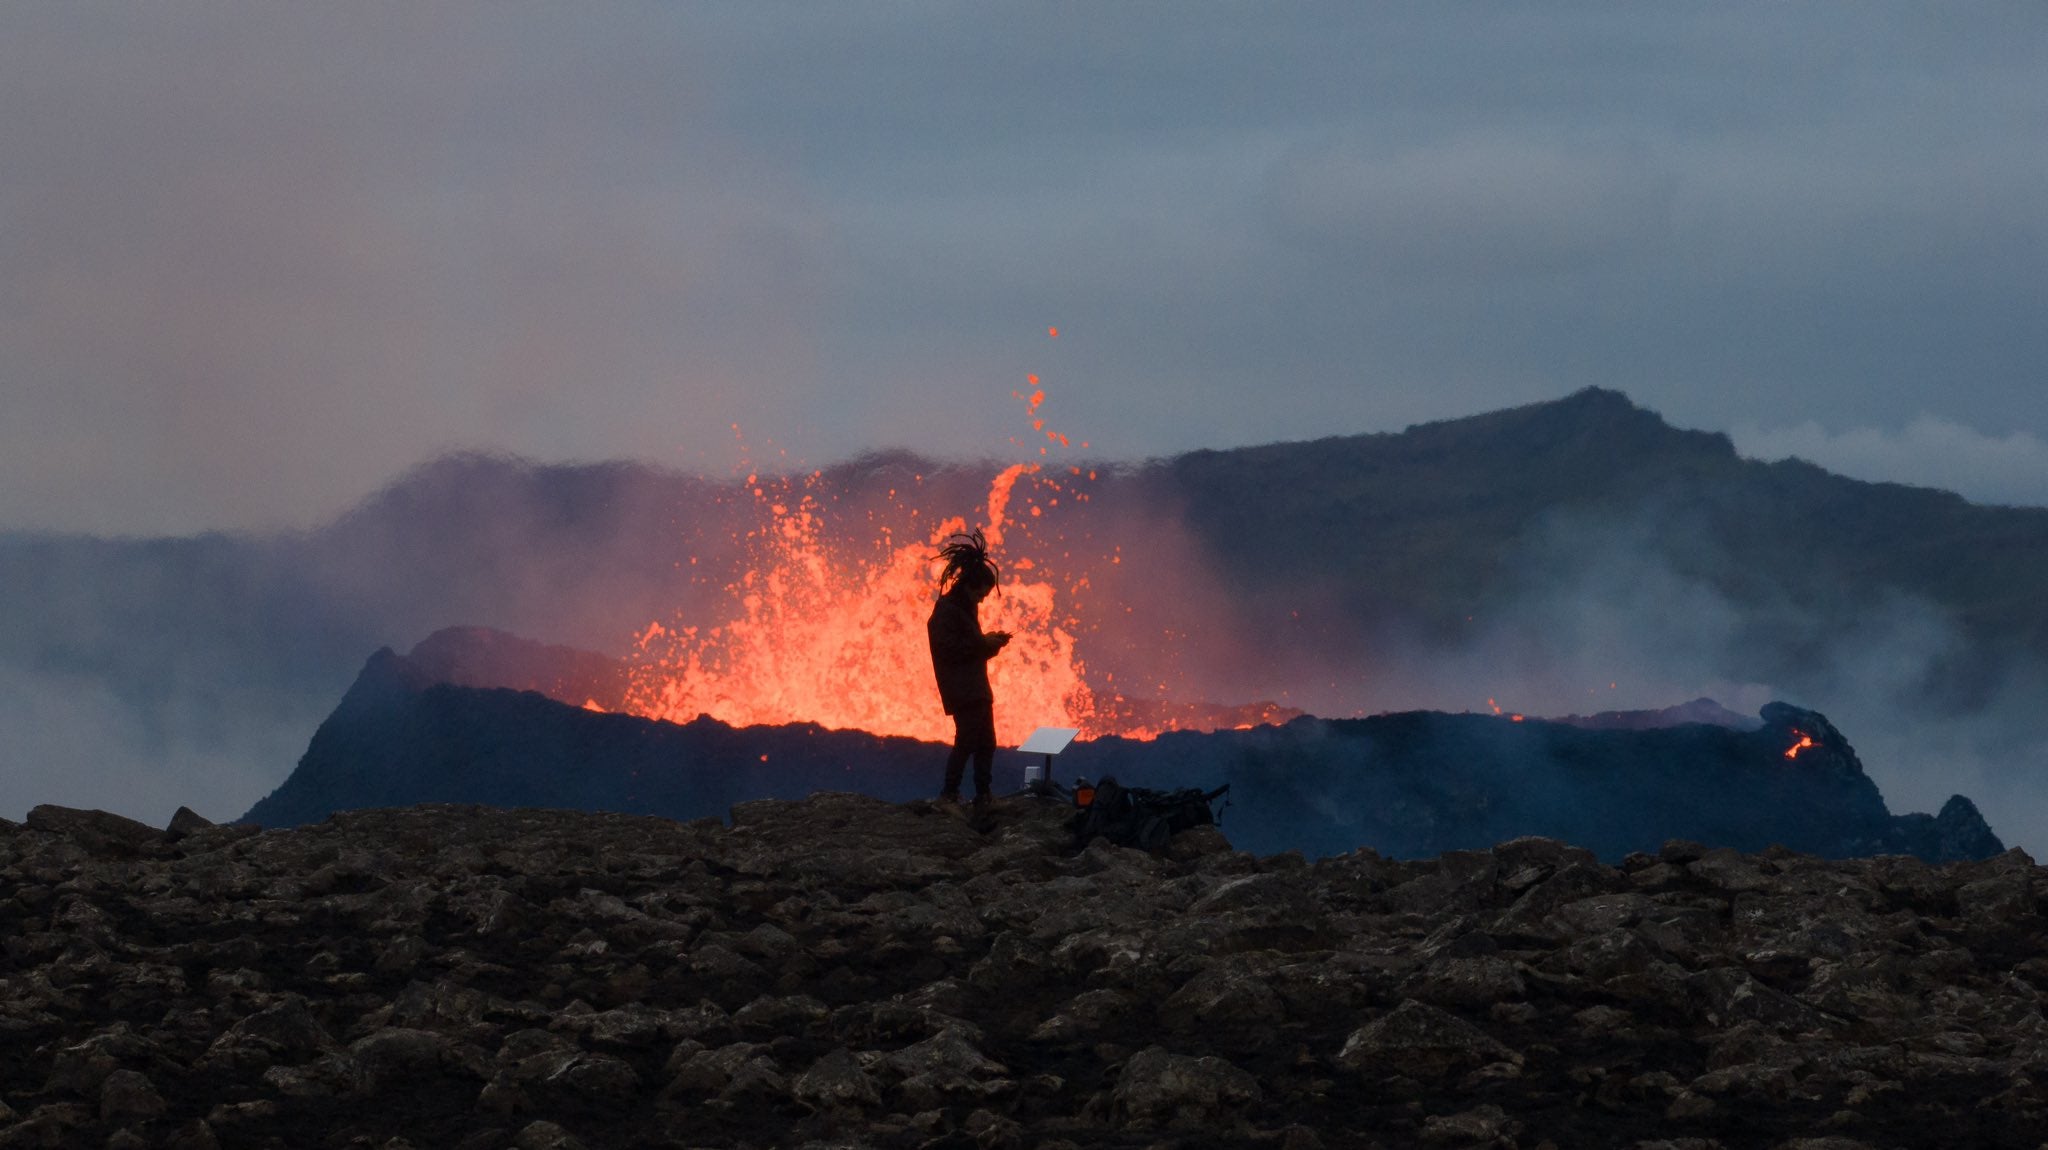 Filmmaker Uses SpaceX Starlink Internet While Documenting Erupting Volcano in Iceland